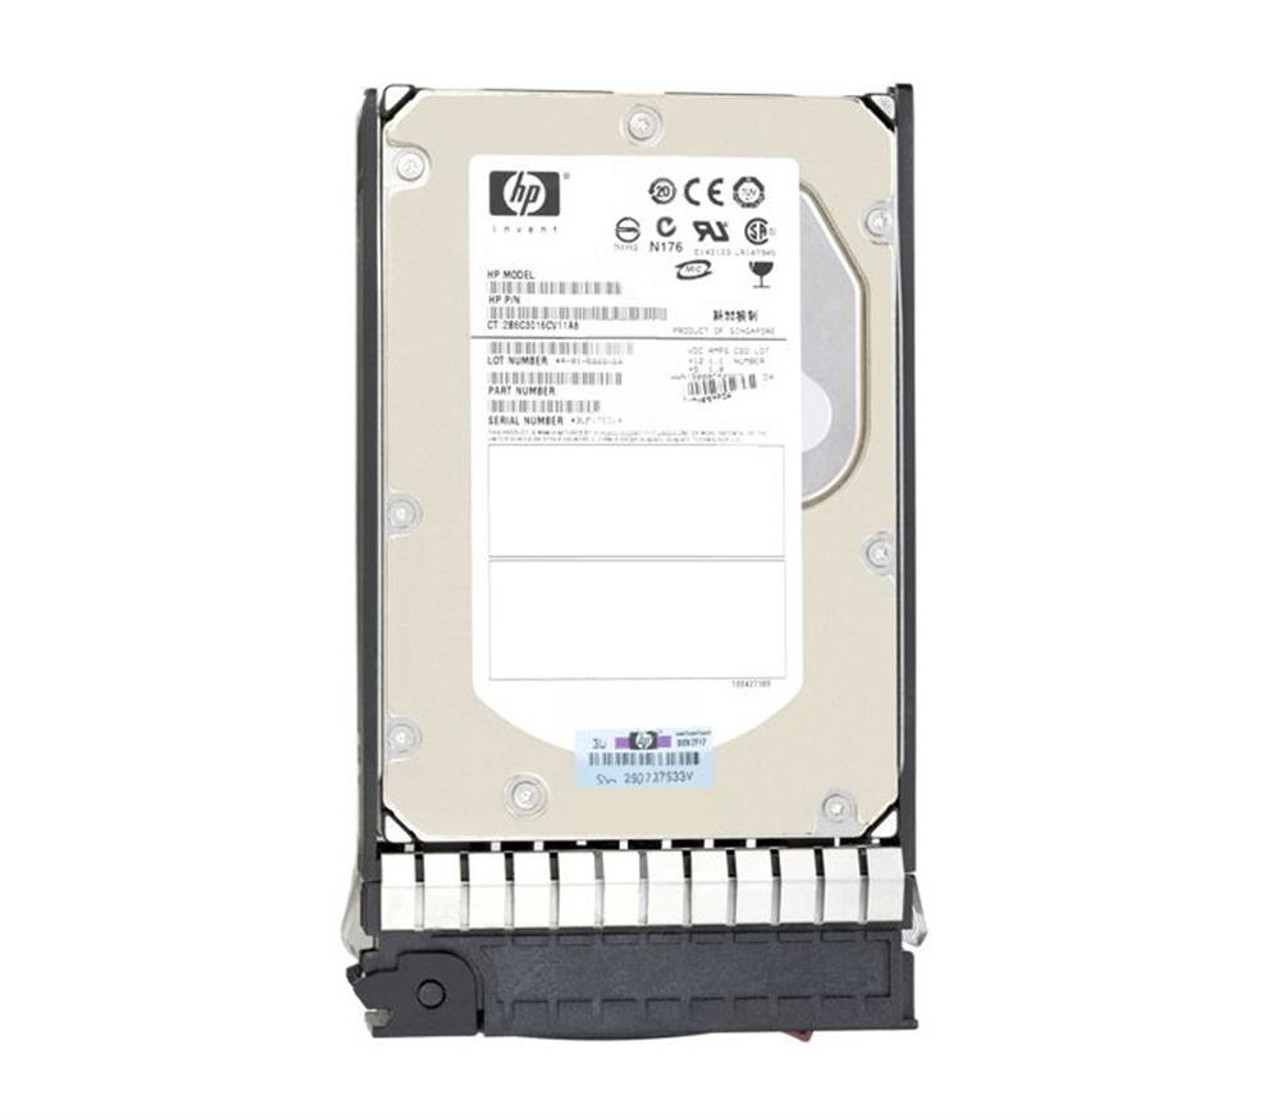 765468-003 HP 2TB 7200RPM SATA 6Gbps (512e) 2.5-inch Internal Hard Drive with Smart Carrier